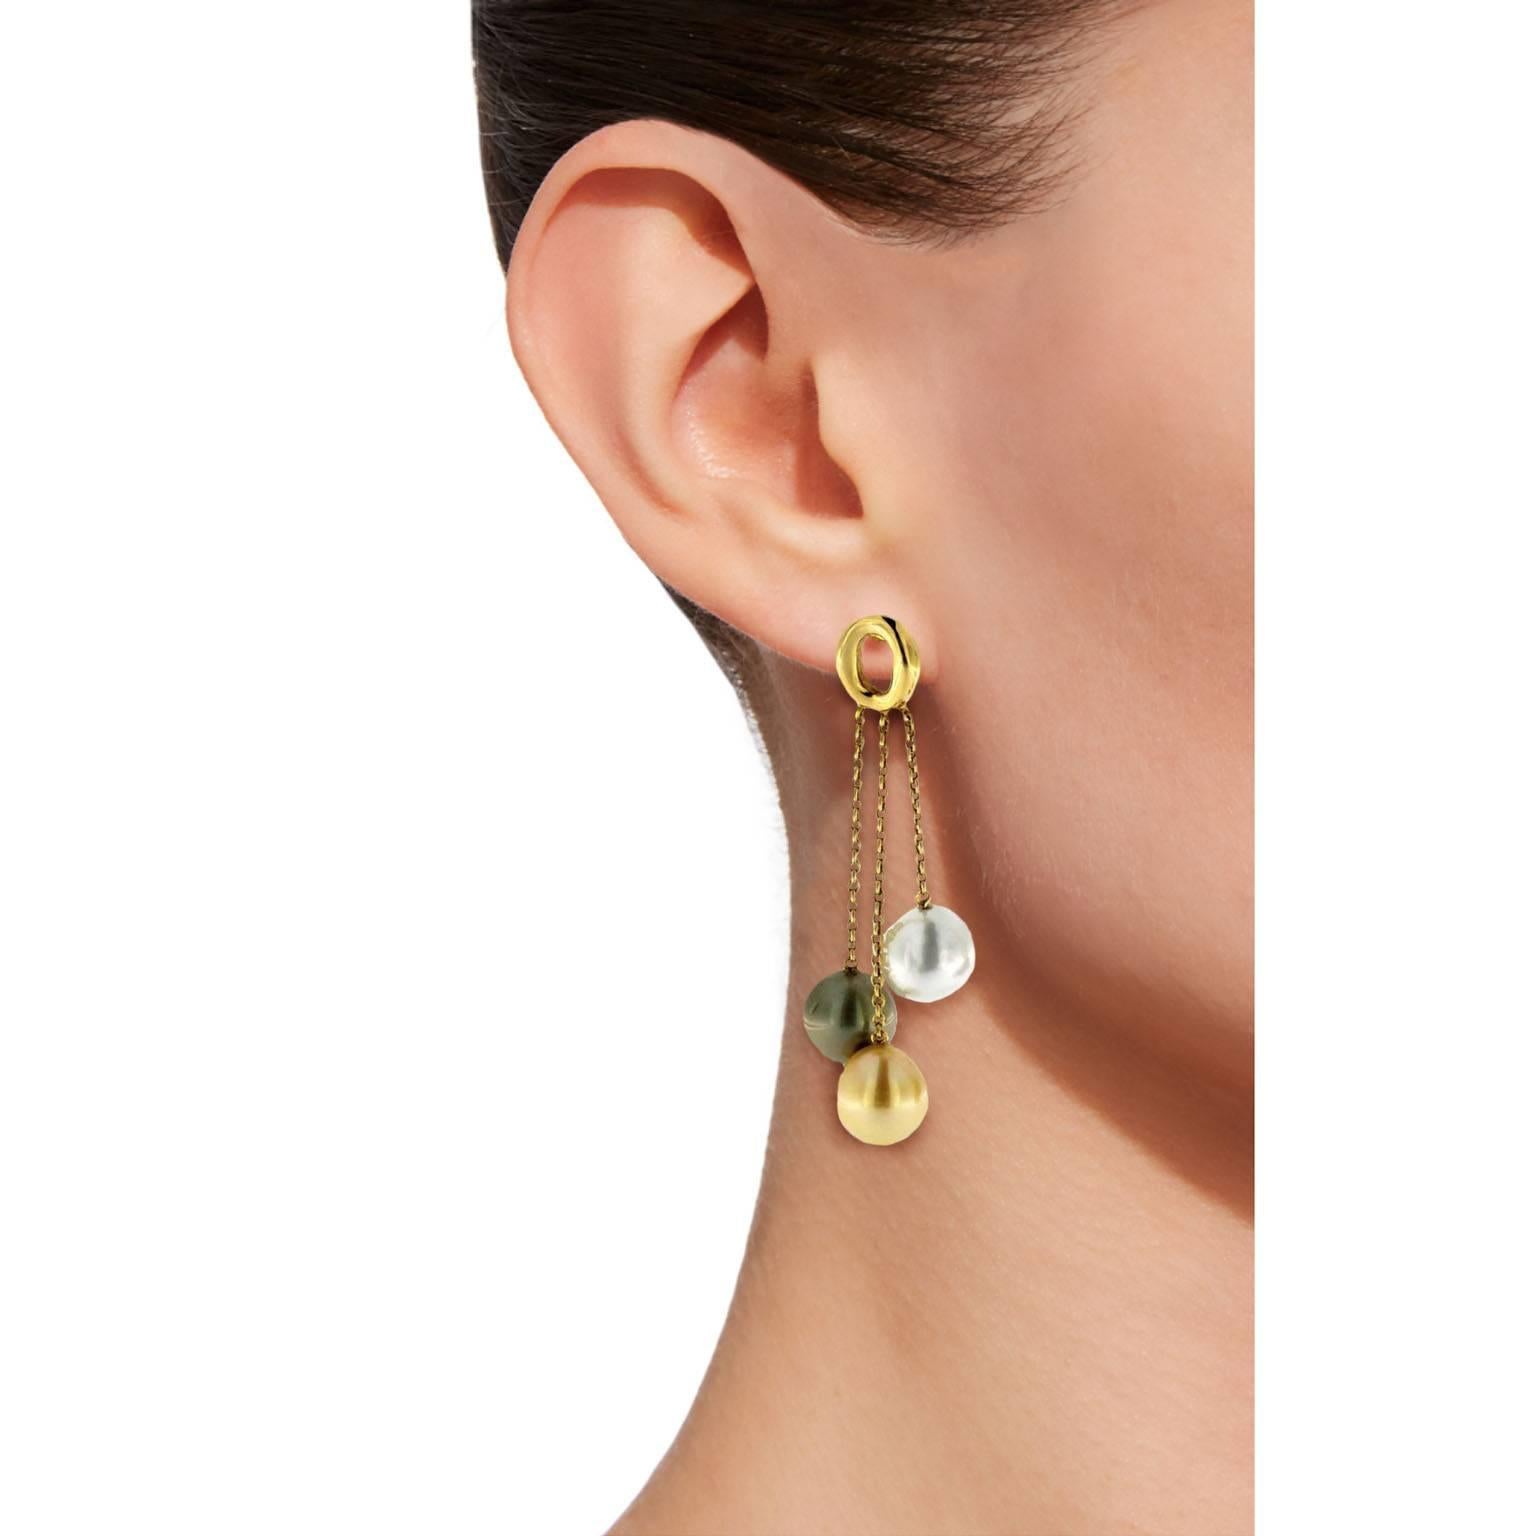 Jona design collection, hand crafted in Italy, 18 karat yellow gold dangle pearl earrings, showcasing two natural grey Tahiti pearls, two Australian white pearls and two natural gold pearls. 
All Jona jewelry is new and has never been previously